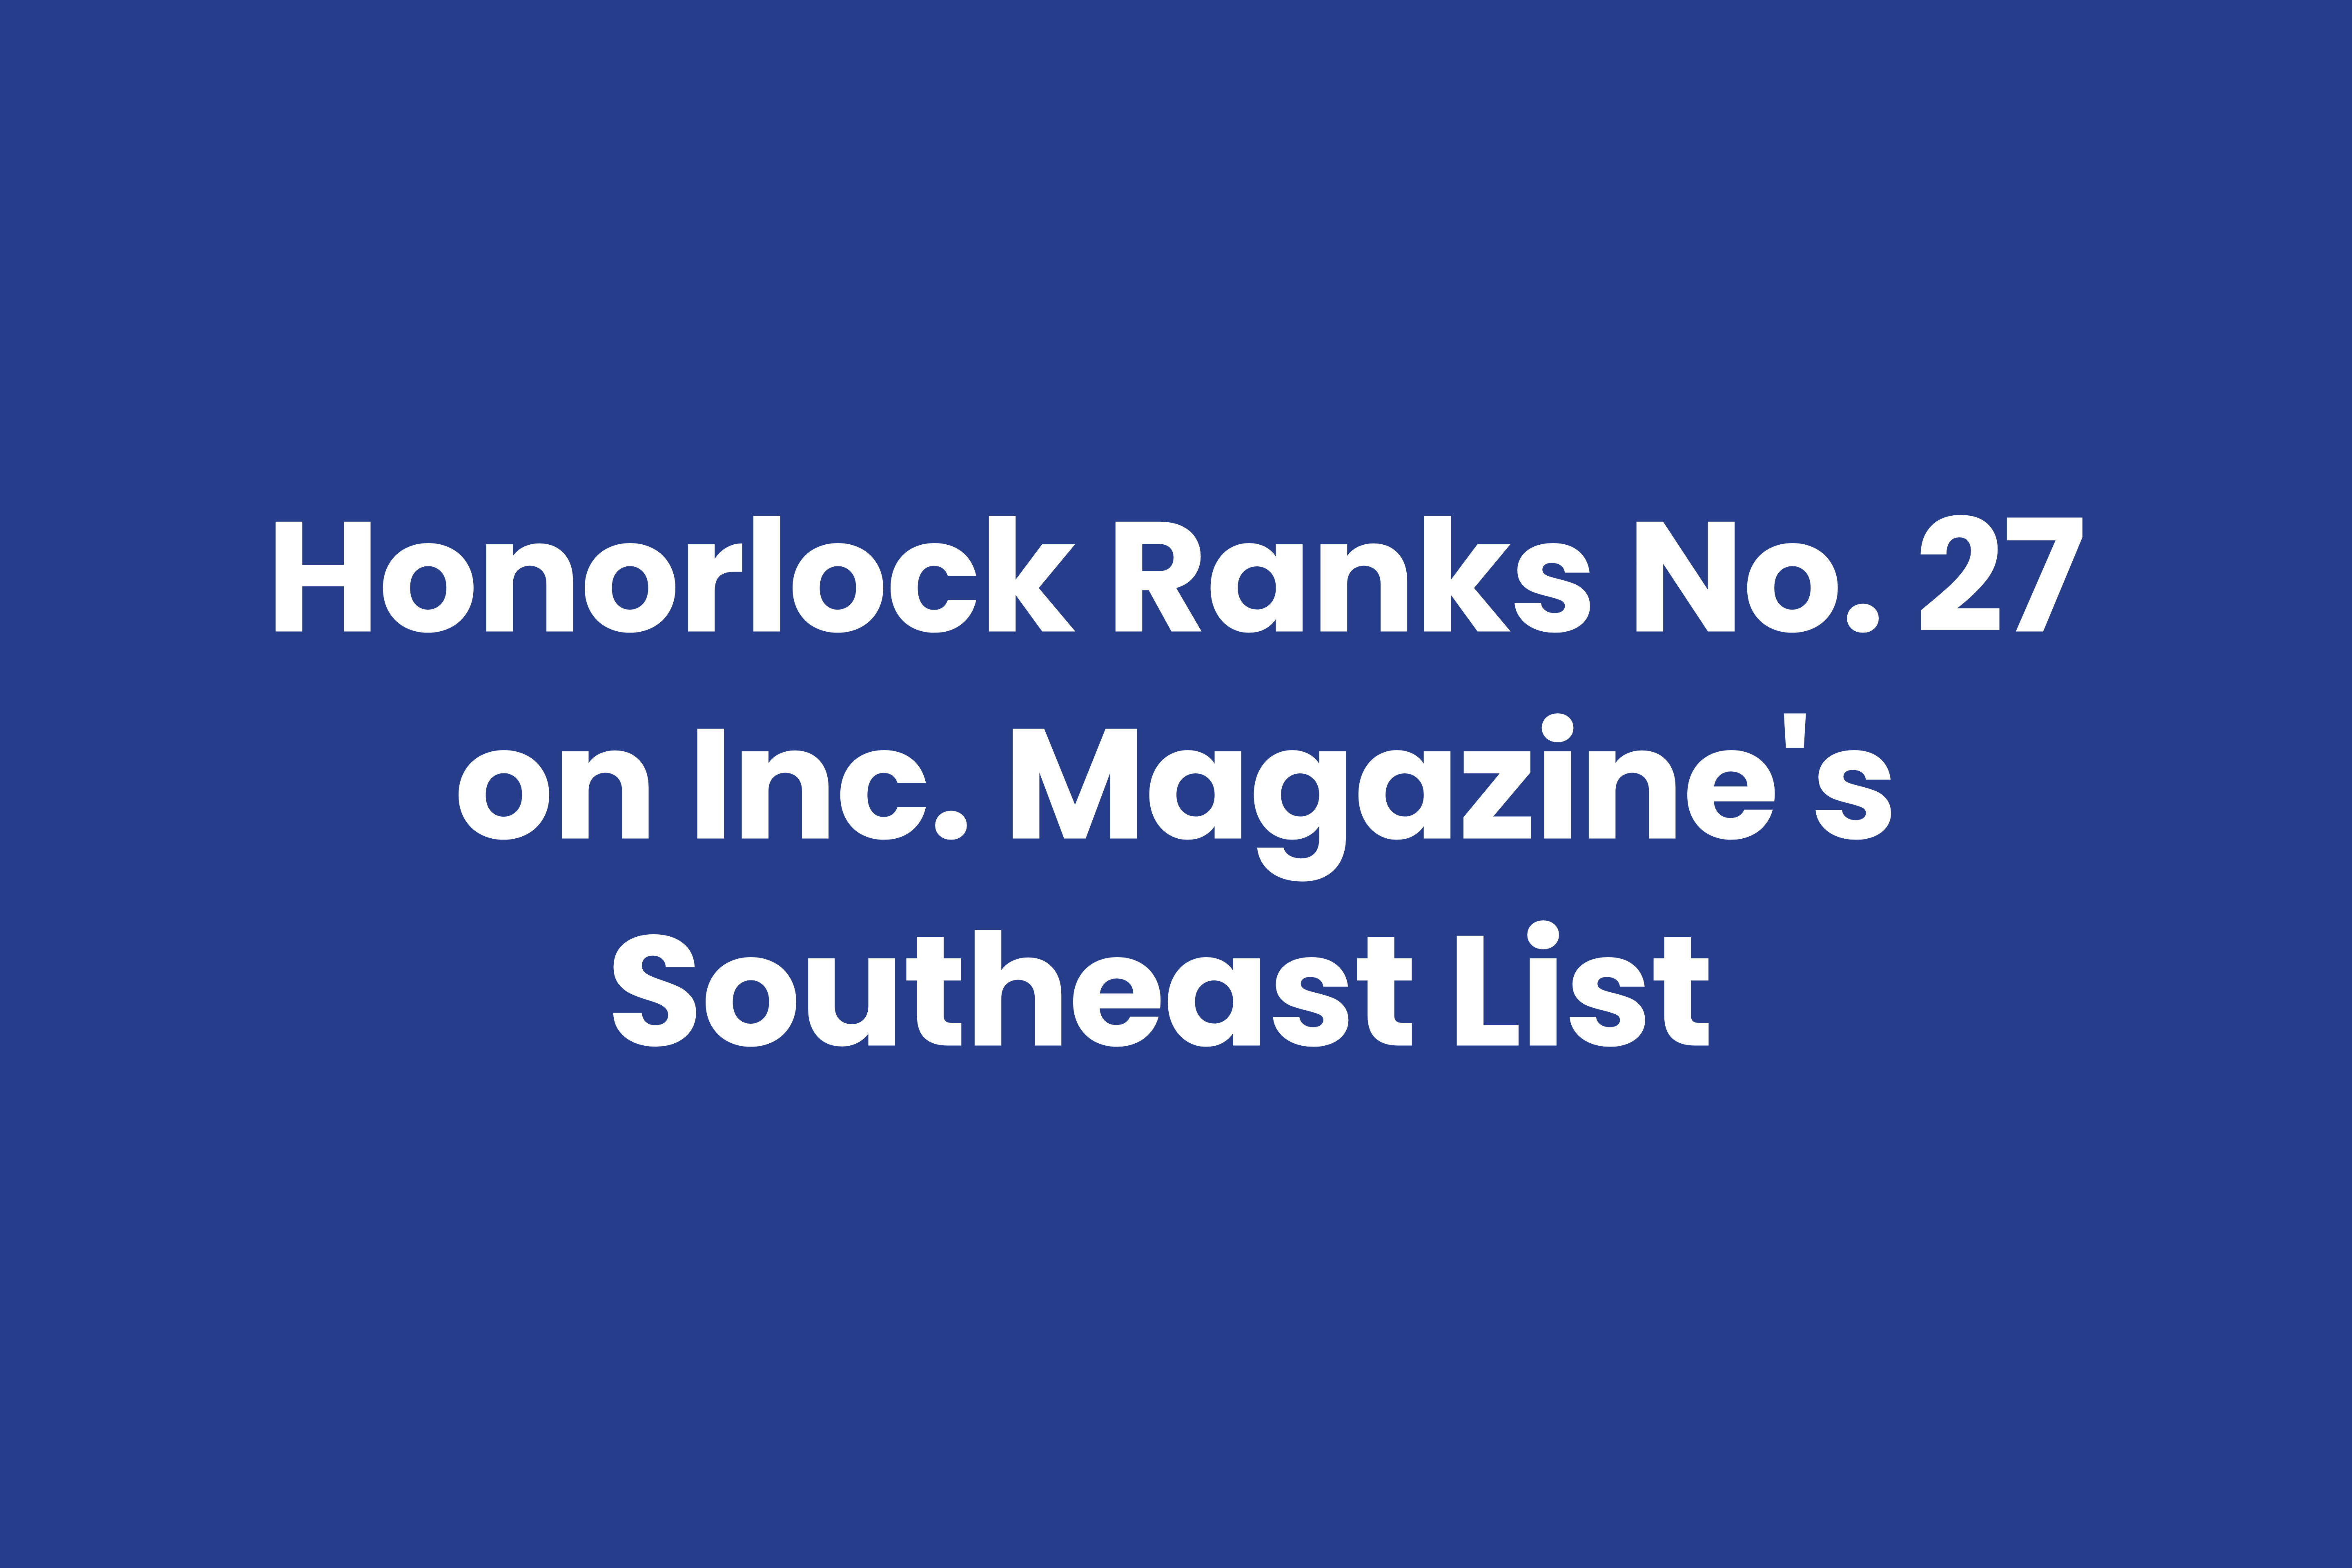 Press release of Ince Magazine ranking for Honorlock online proctoring service